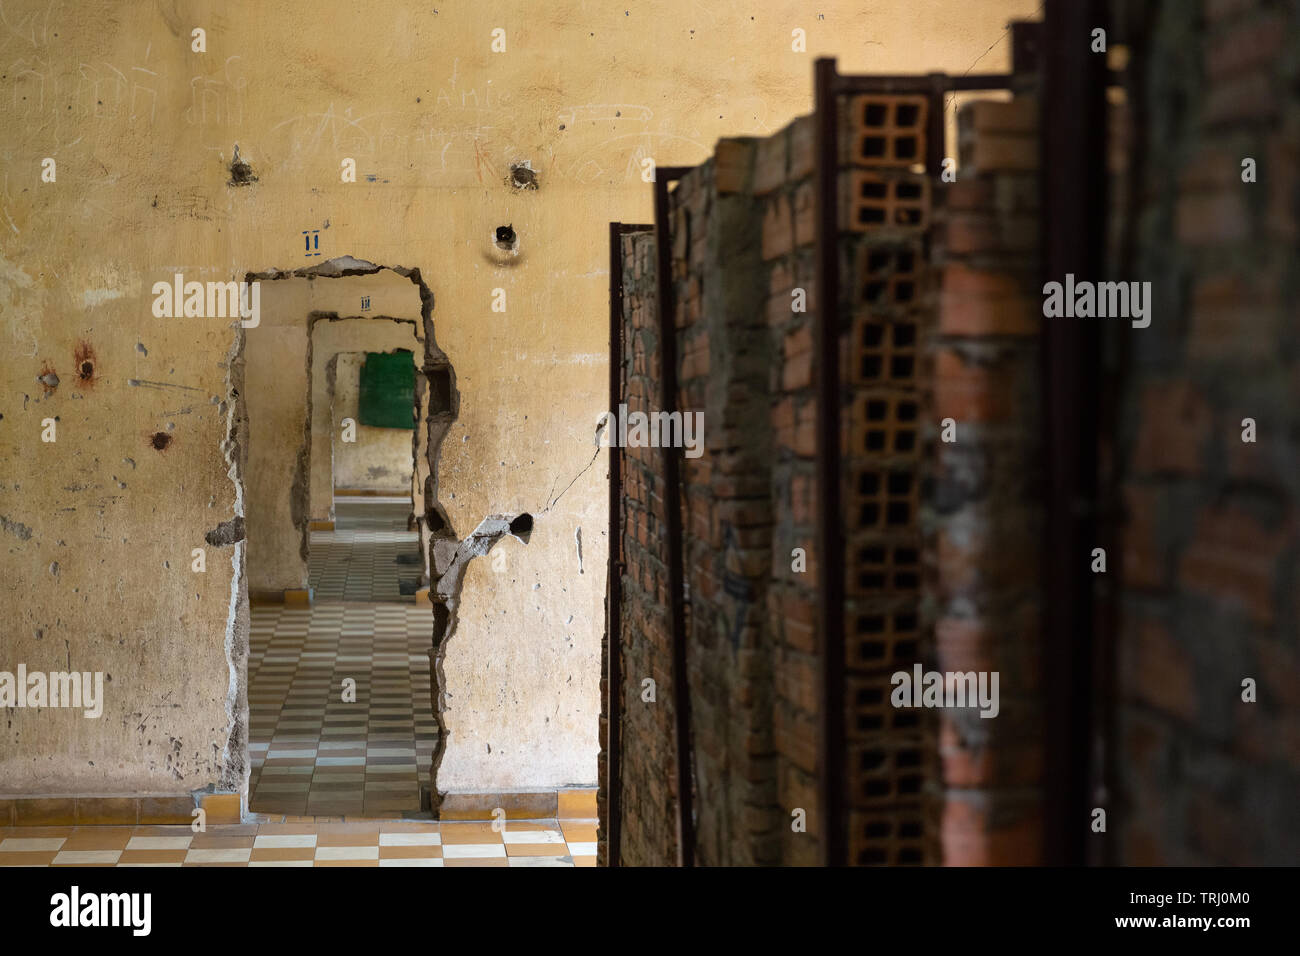 Rows of brick prison cells at Tuol Sleng Genocide Museum, Phnom Penh, Cambodia, Asia Stock Photo